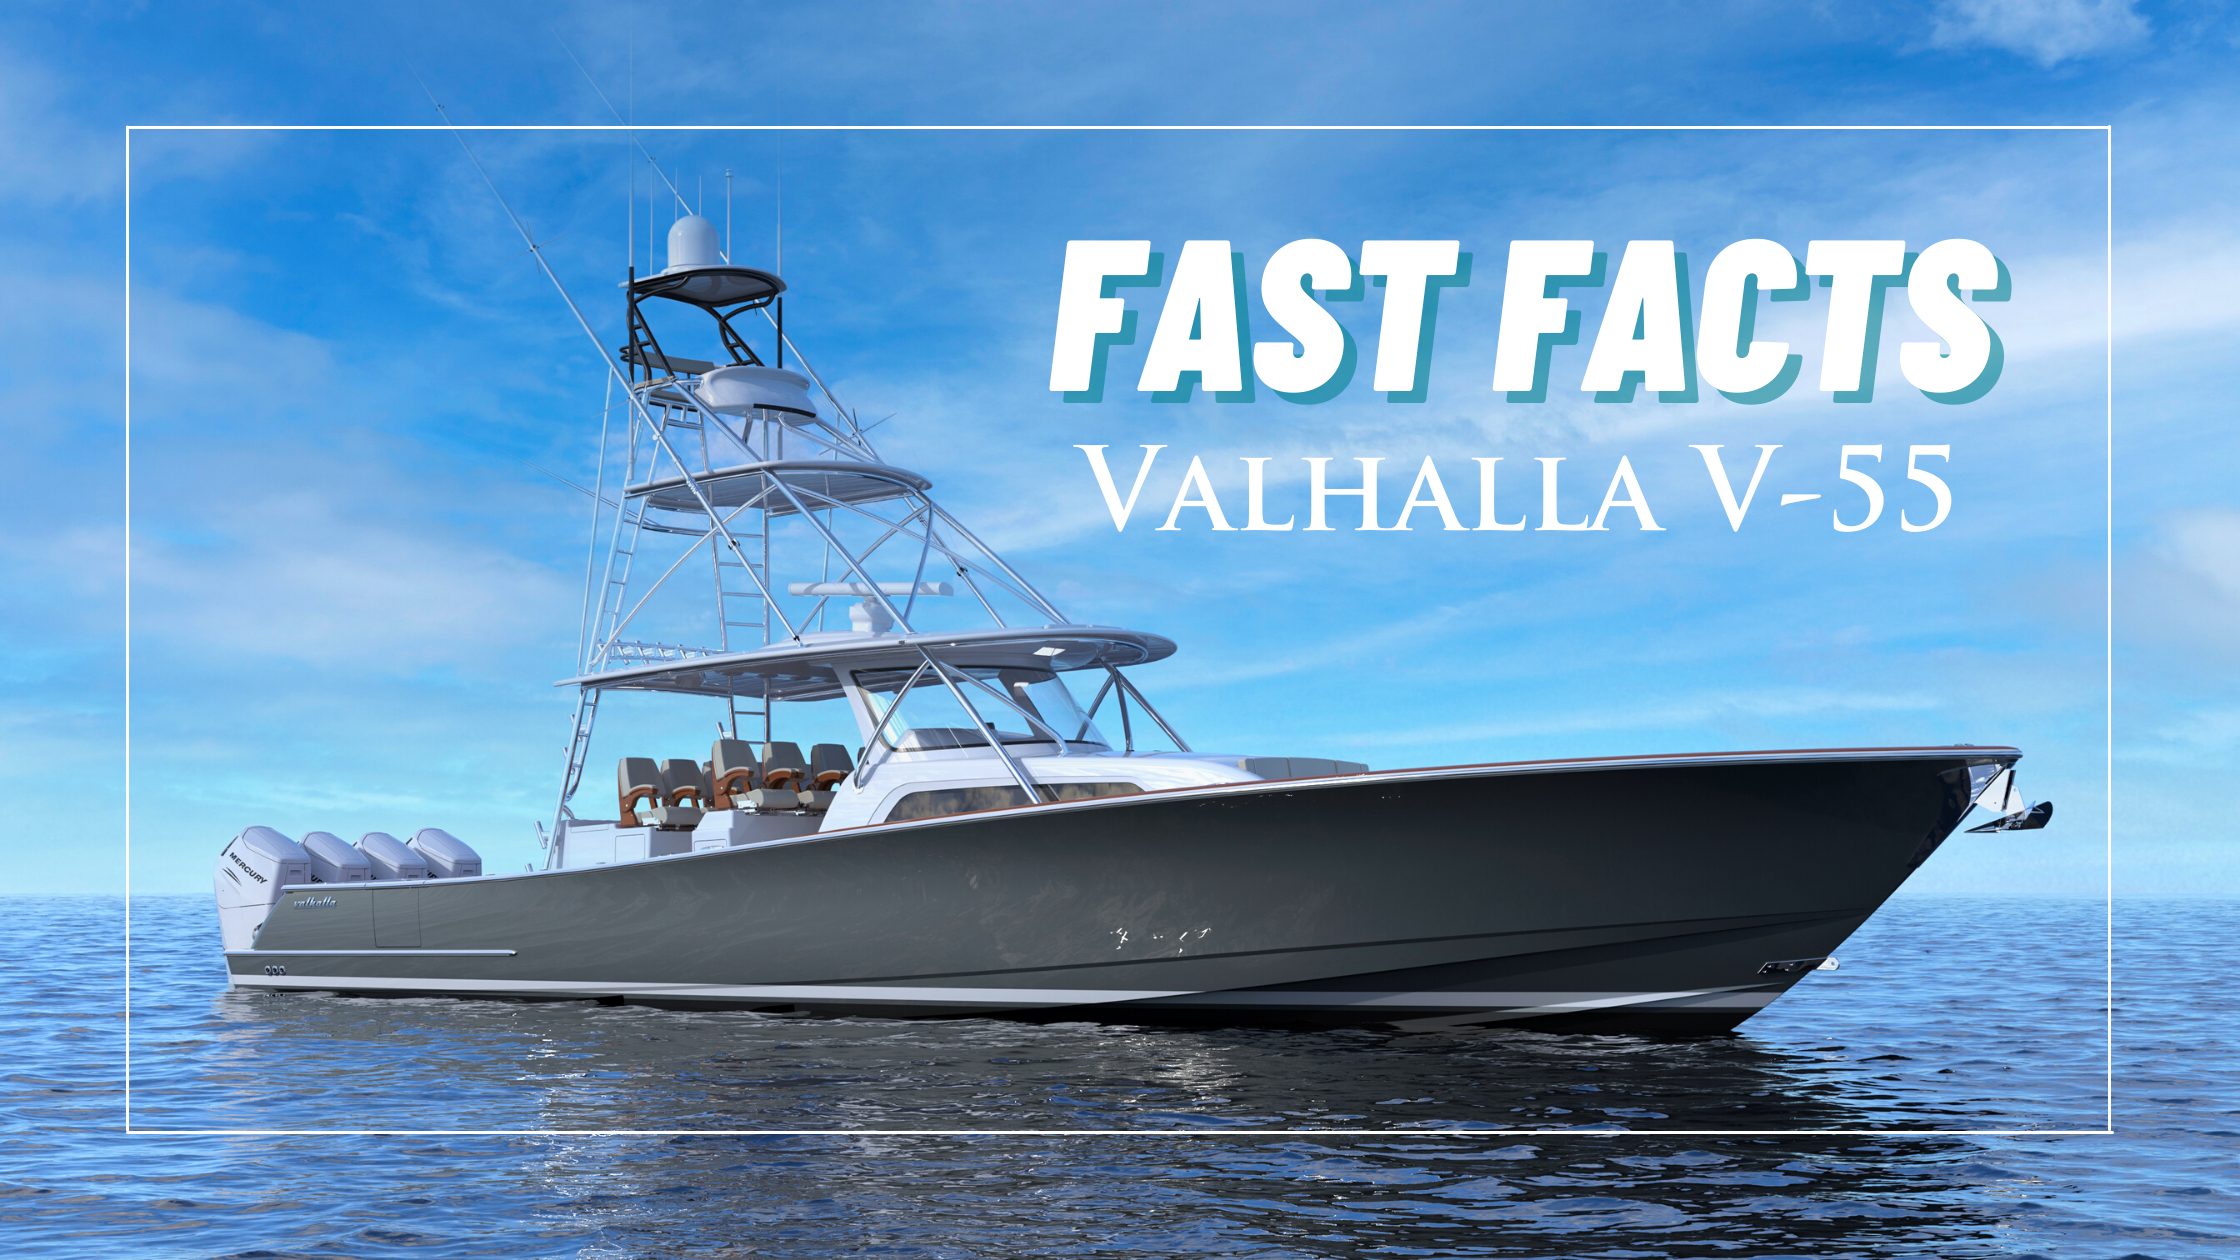 Fast Facts on the Valhalla V-55